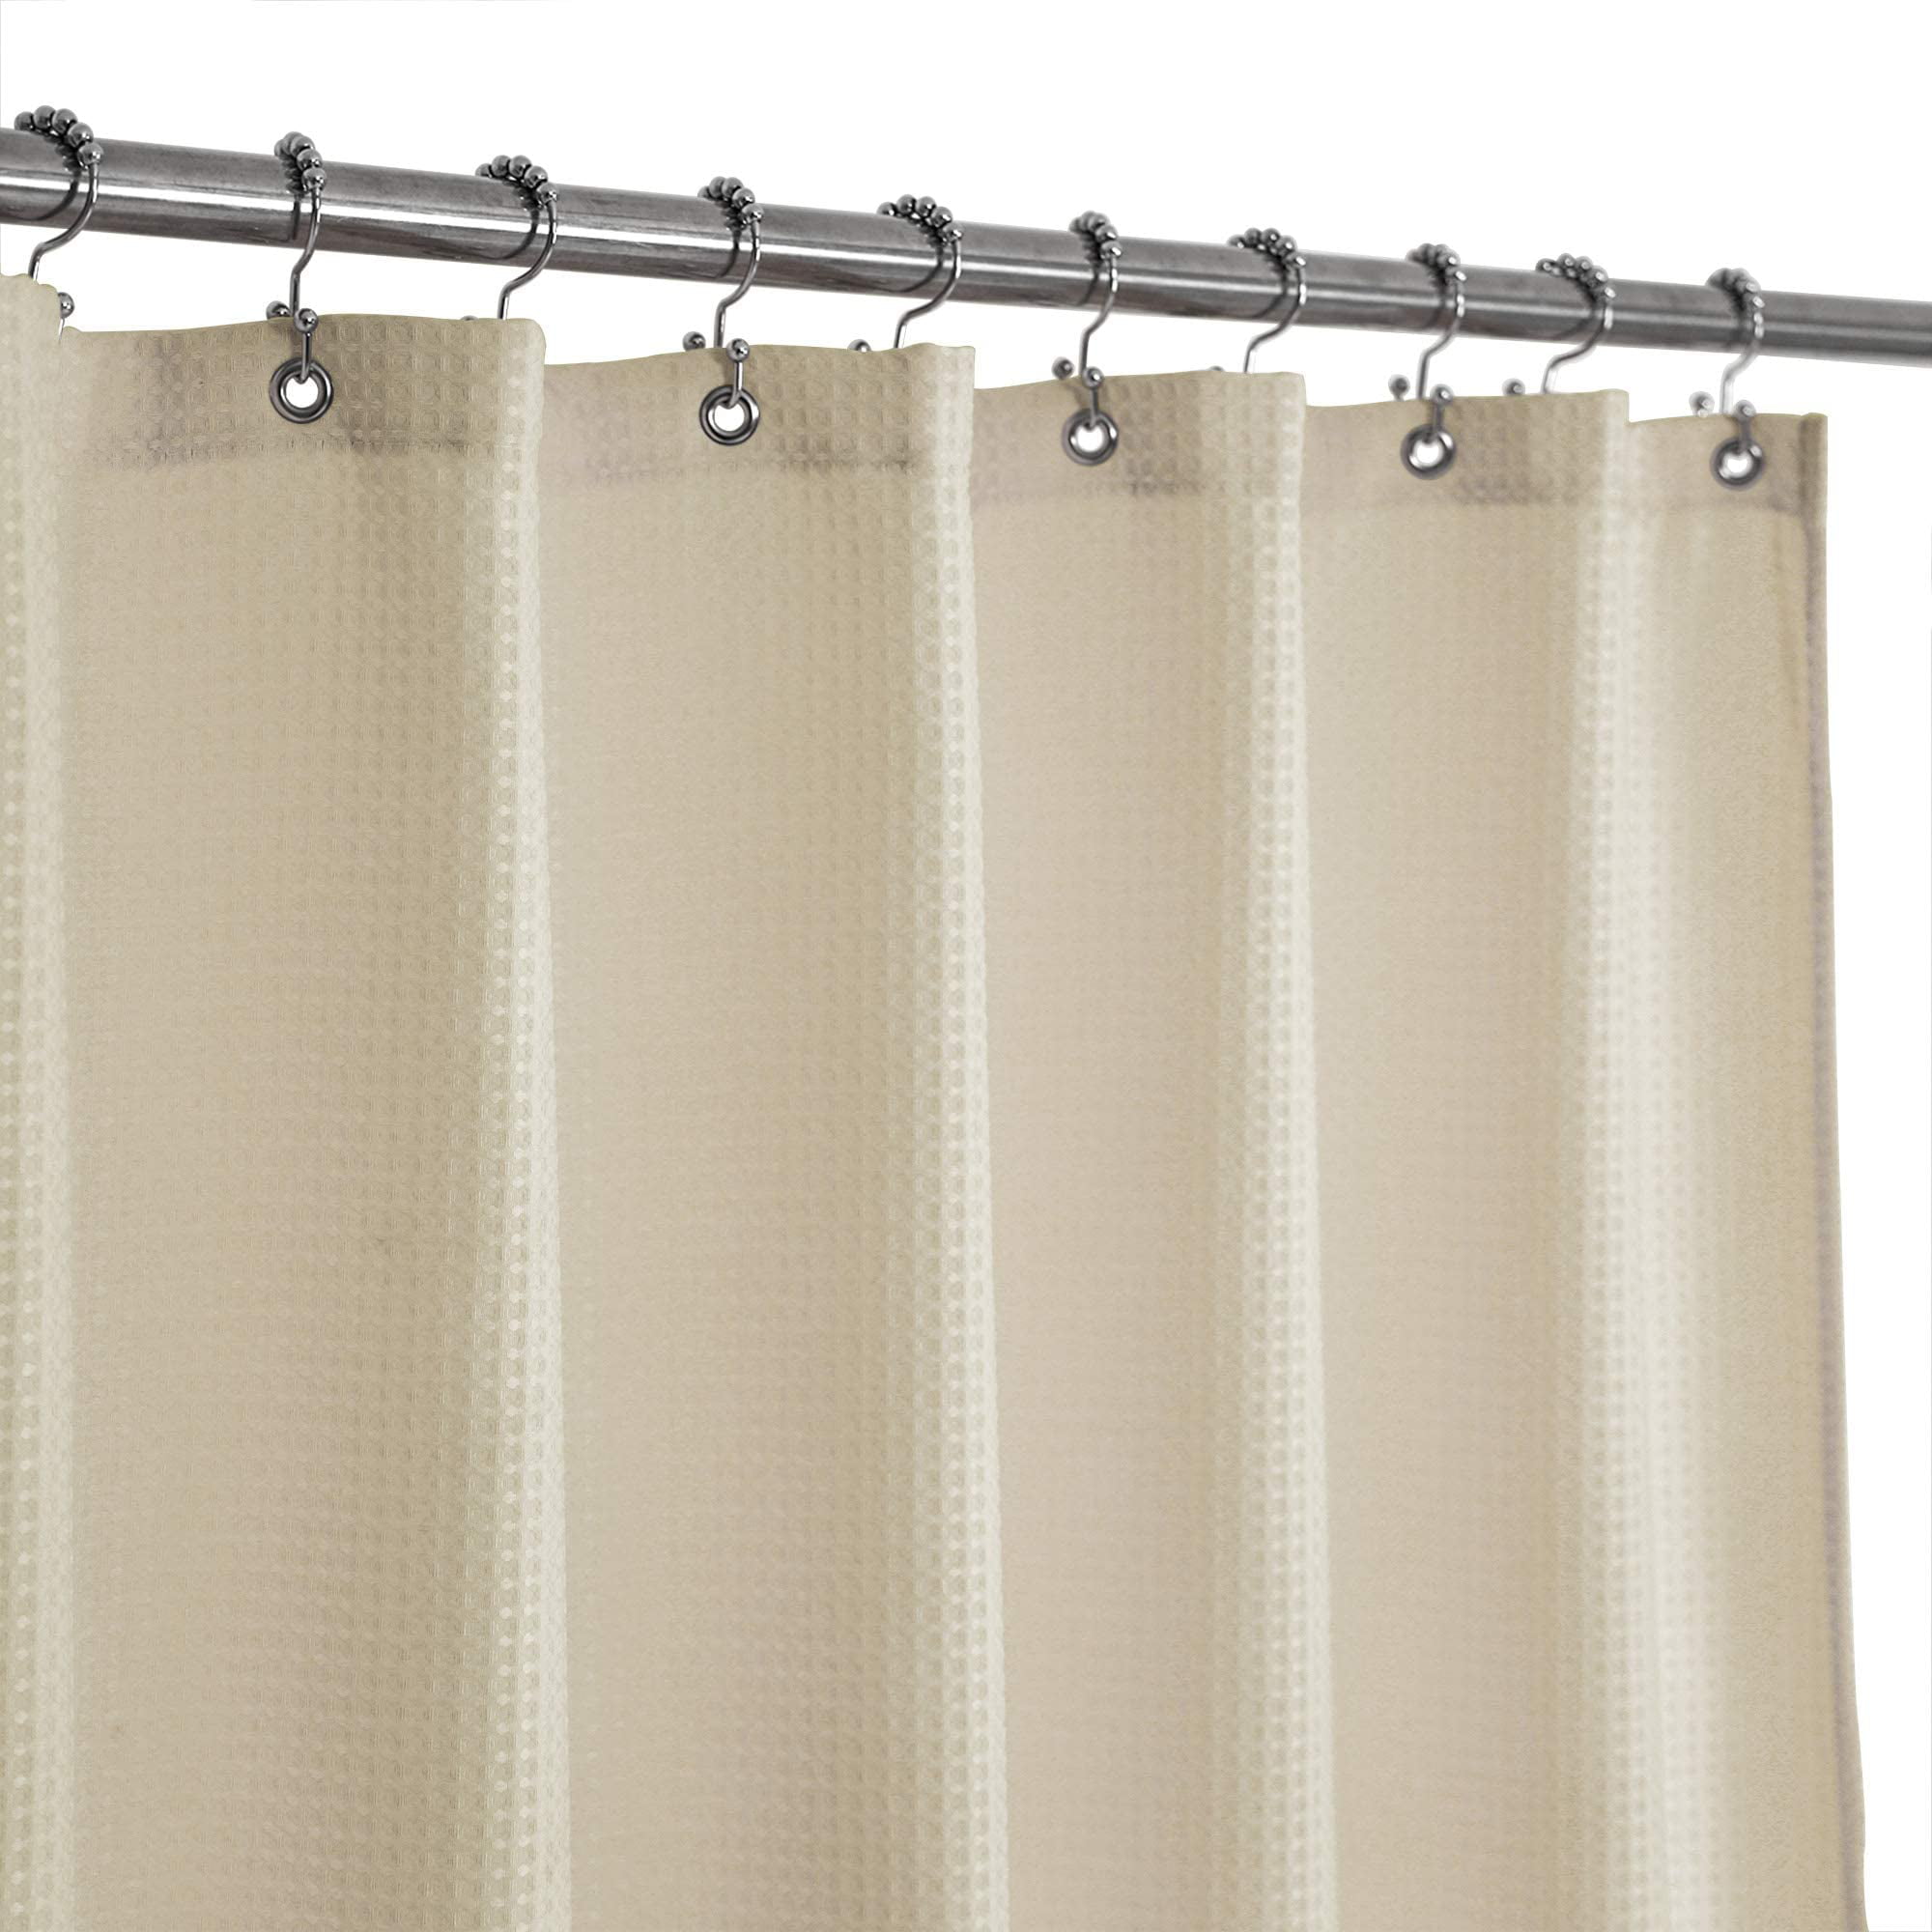 Extra Wide Long Shower Curtain for Bathroom Water Repellent Fabric Mildew Resistant Washable Cloth 108 x 78, Brown Leaf Hotel Quality, Eco Friendly, Heavy Weight Hem with White Plastic Hooks